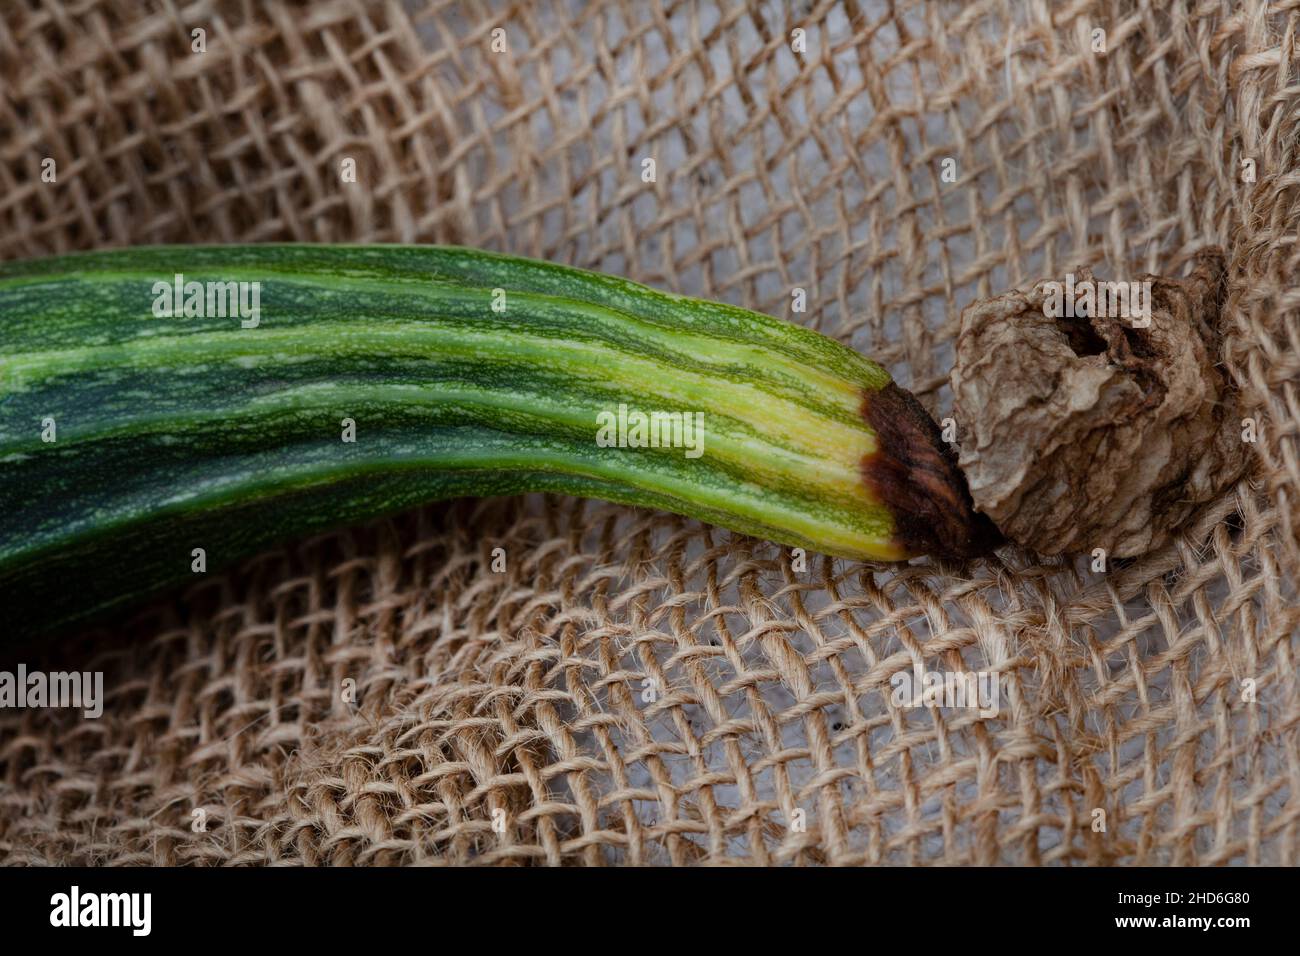 zucchini squash with blossom end rot Stock Photo